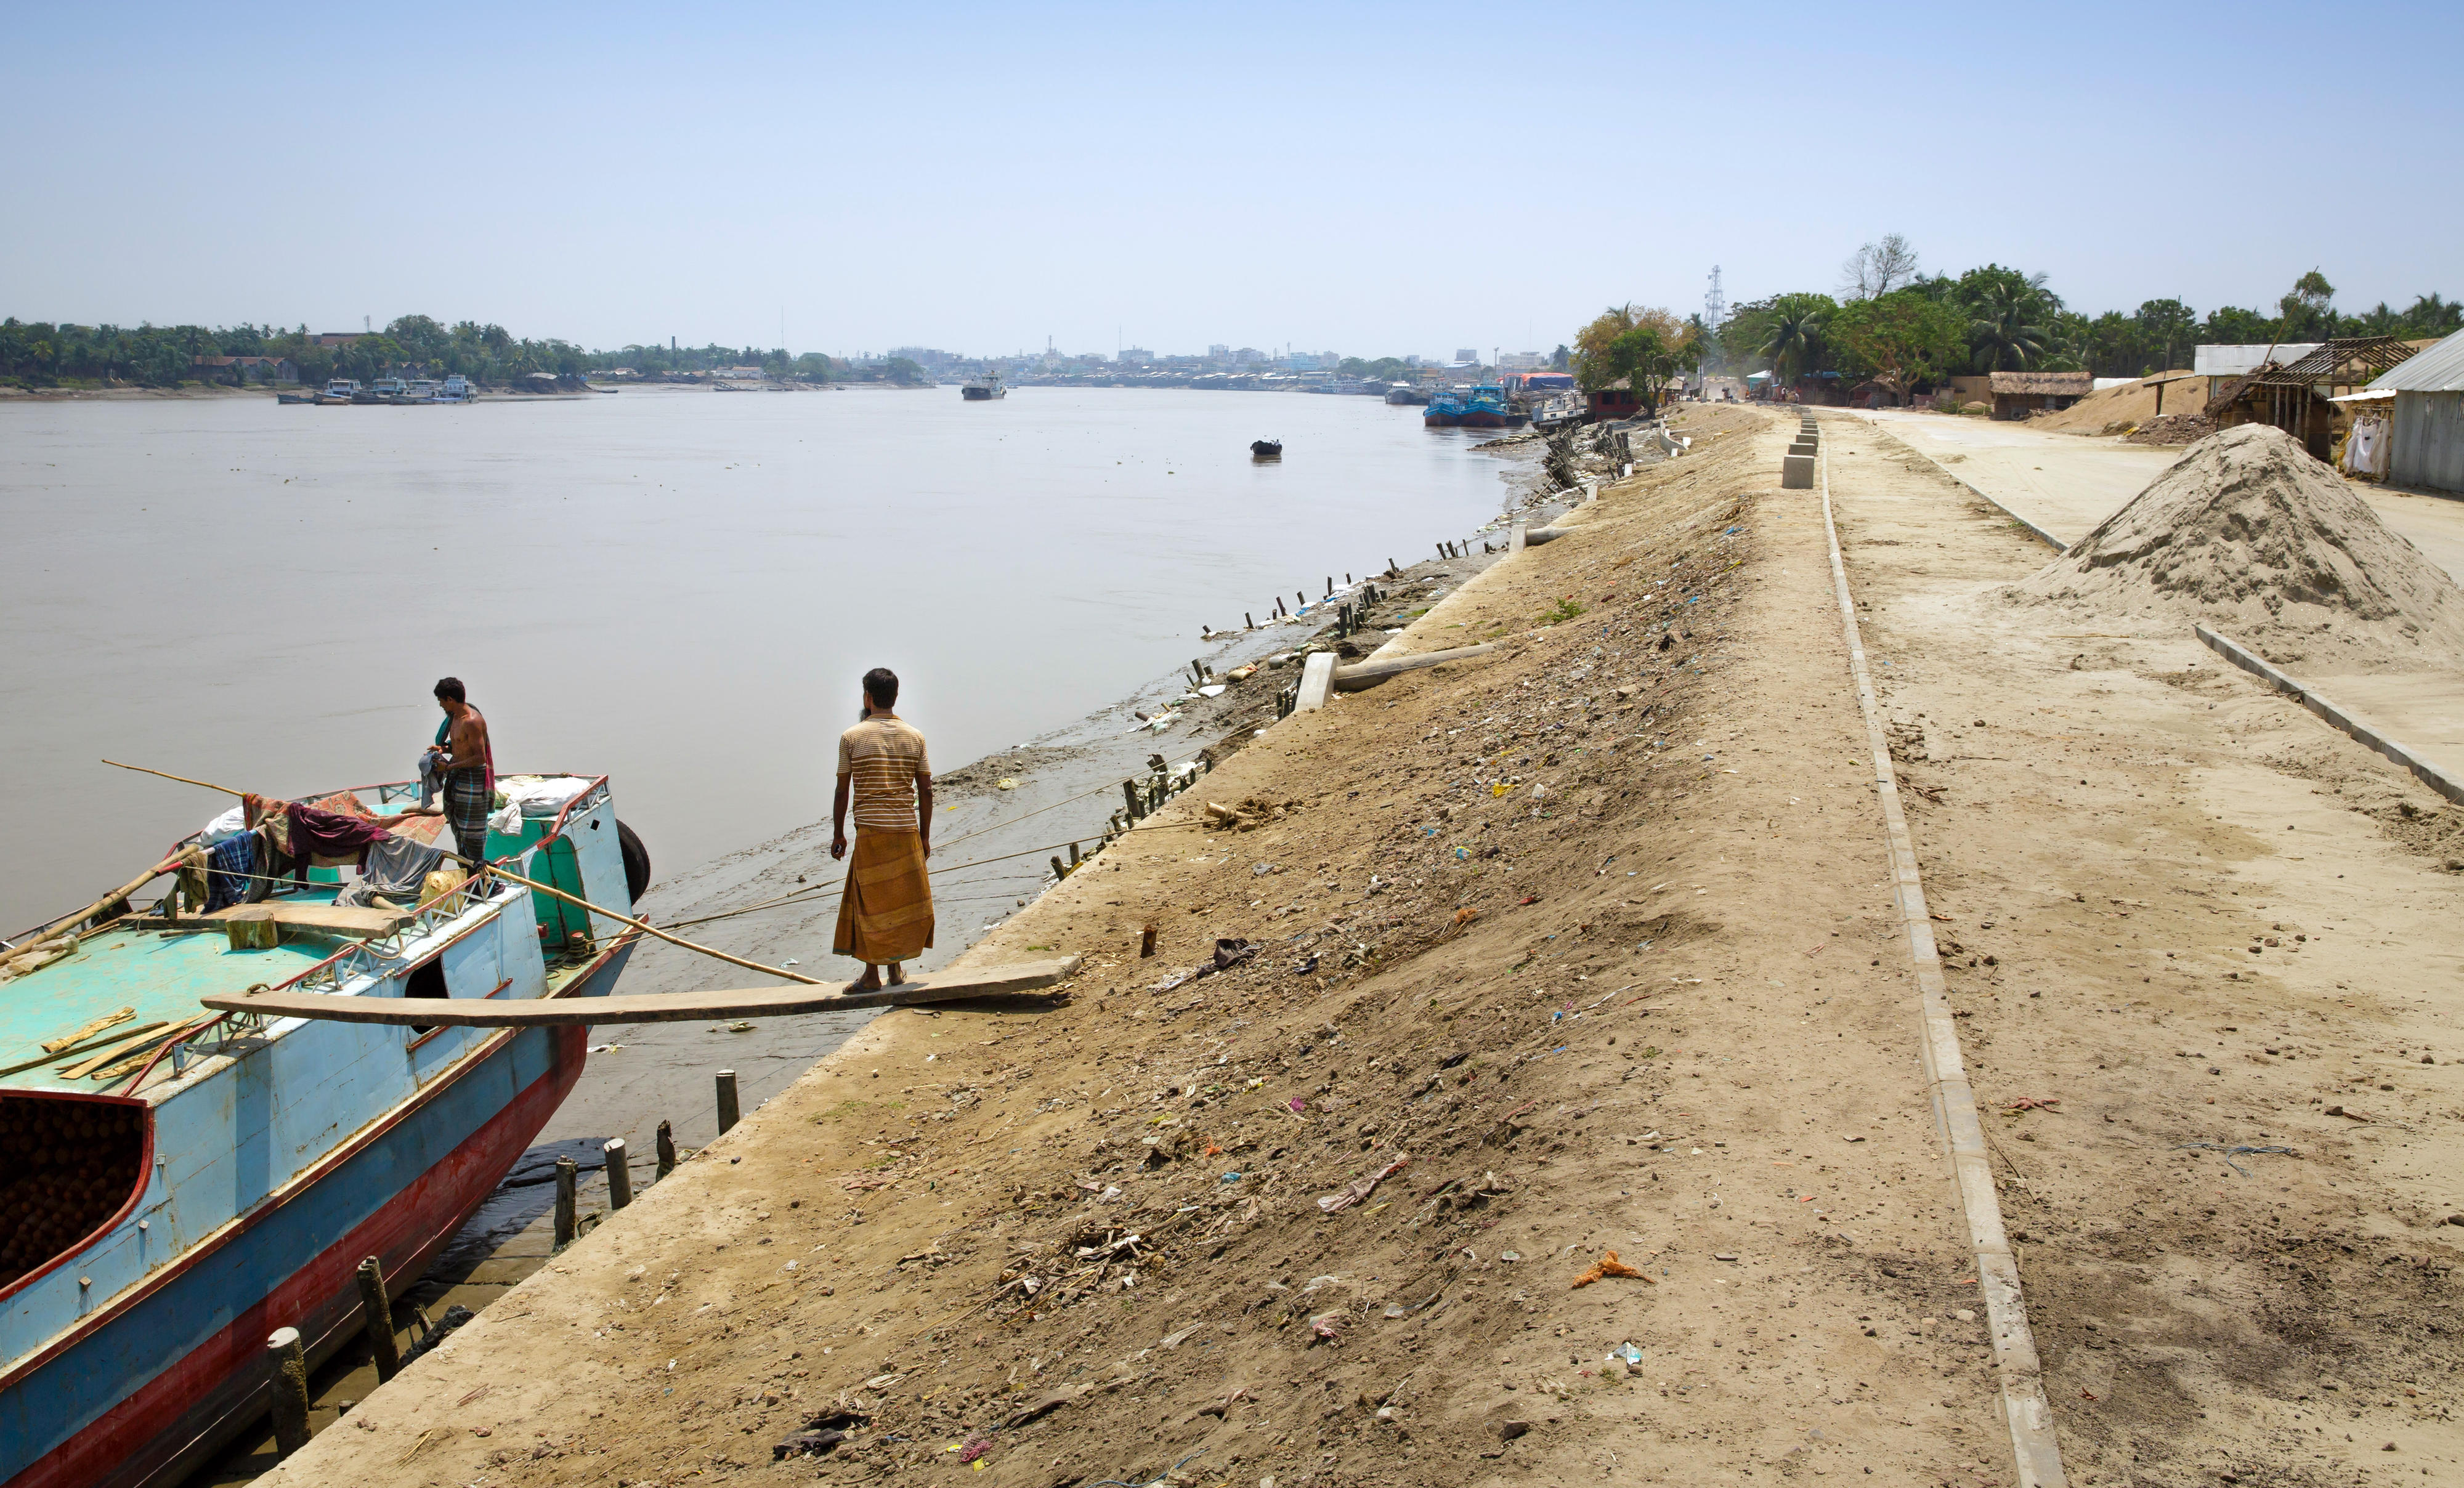 Dam road to protect a residential area at the port of Khulna in Bangladesh